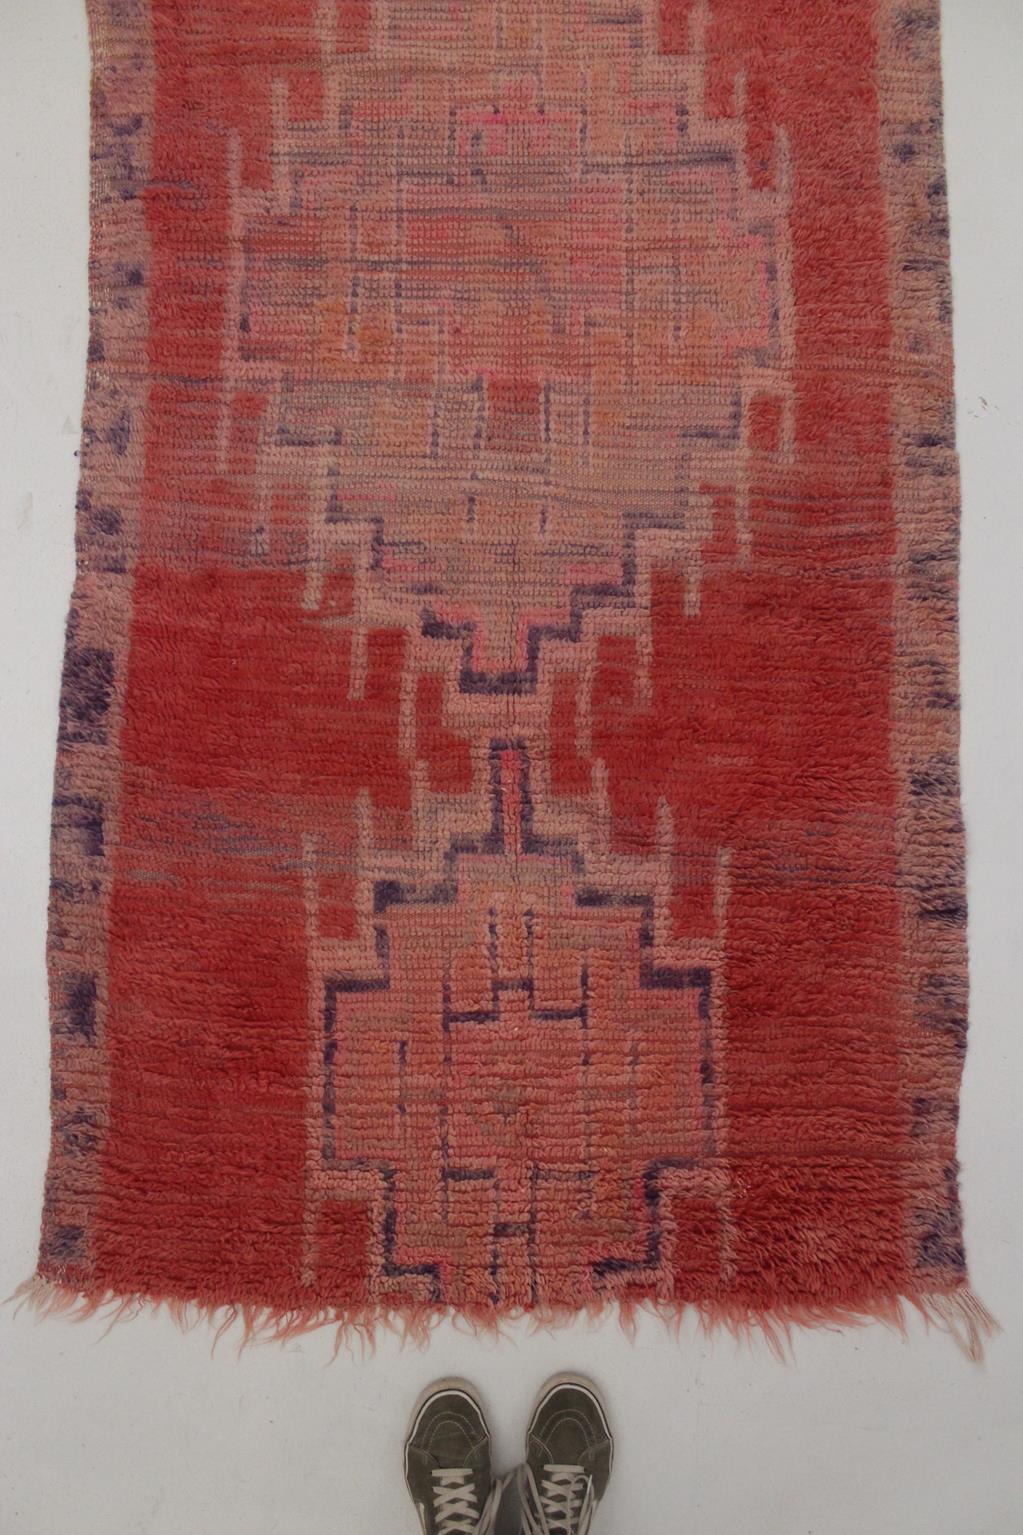 What a lovely rug! You don't come accross rugs this long every day so I litteraly jumped on that one! It is all handmade and probably comes from the Boujad tribe, known for using the pink/red tones in their rugs traditionally. The composition is